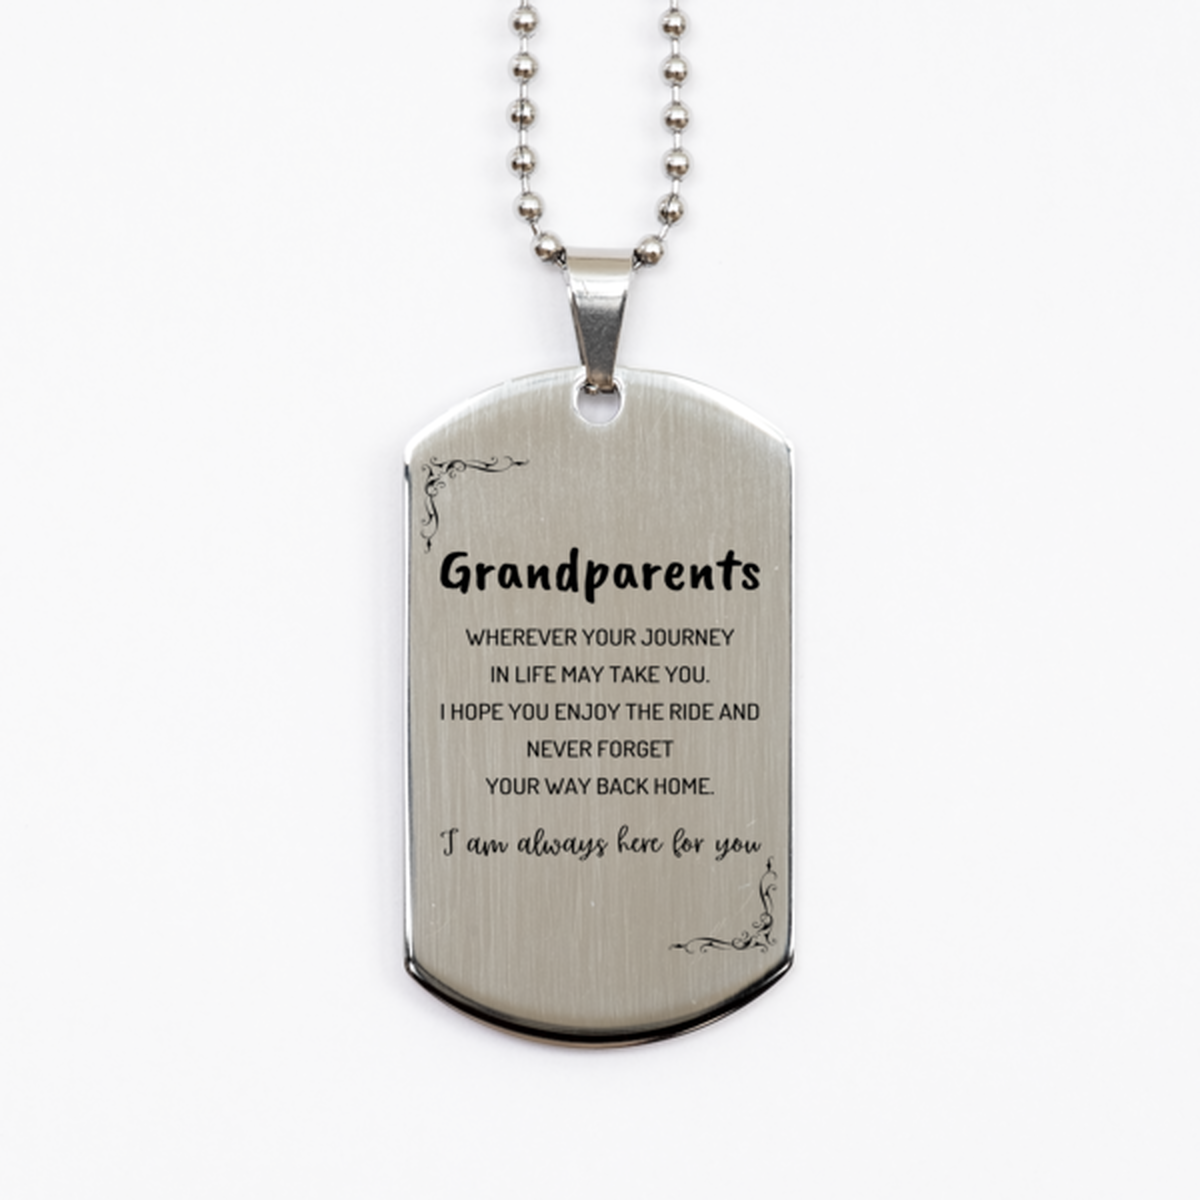 Grandparents wherever your journey in life may take you, I am always here for you Grandparents Silver Dog Tag, Awesome Christmas Gifts For Grandparents, Grandparents Birthday Gifts for Men Women Family Loved One